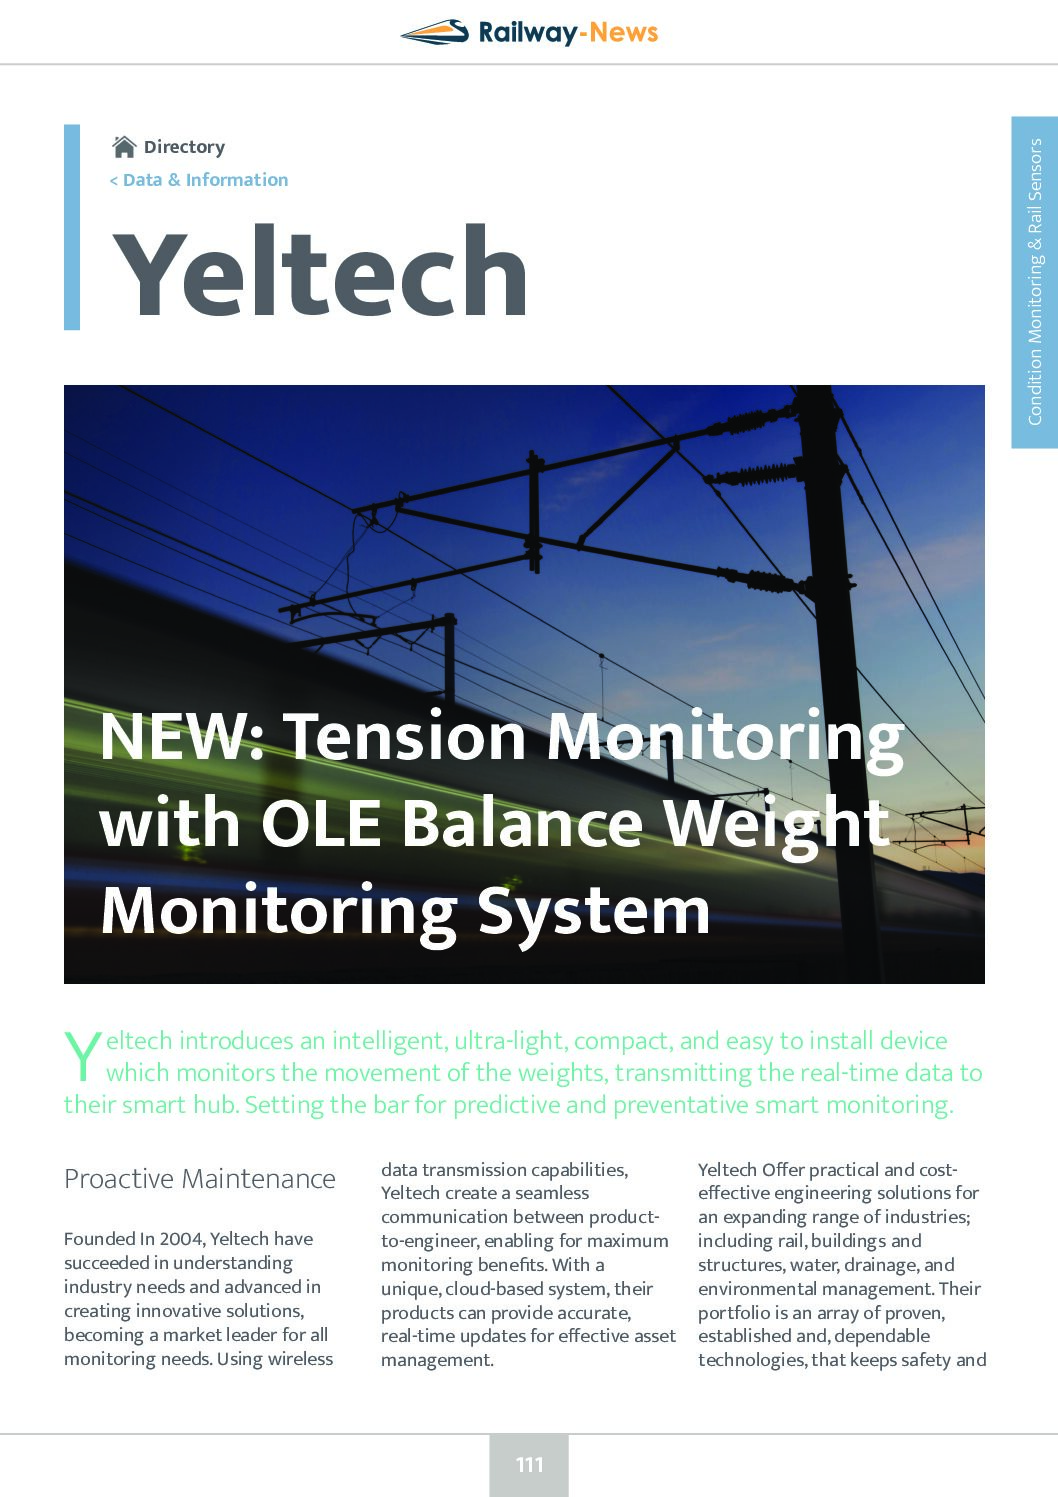 NEW: Tension Monitoring with OLE Balance Weight Monitoring System